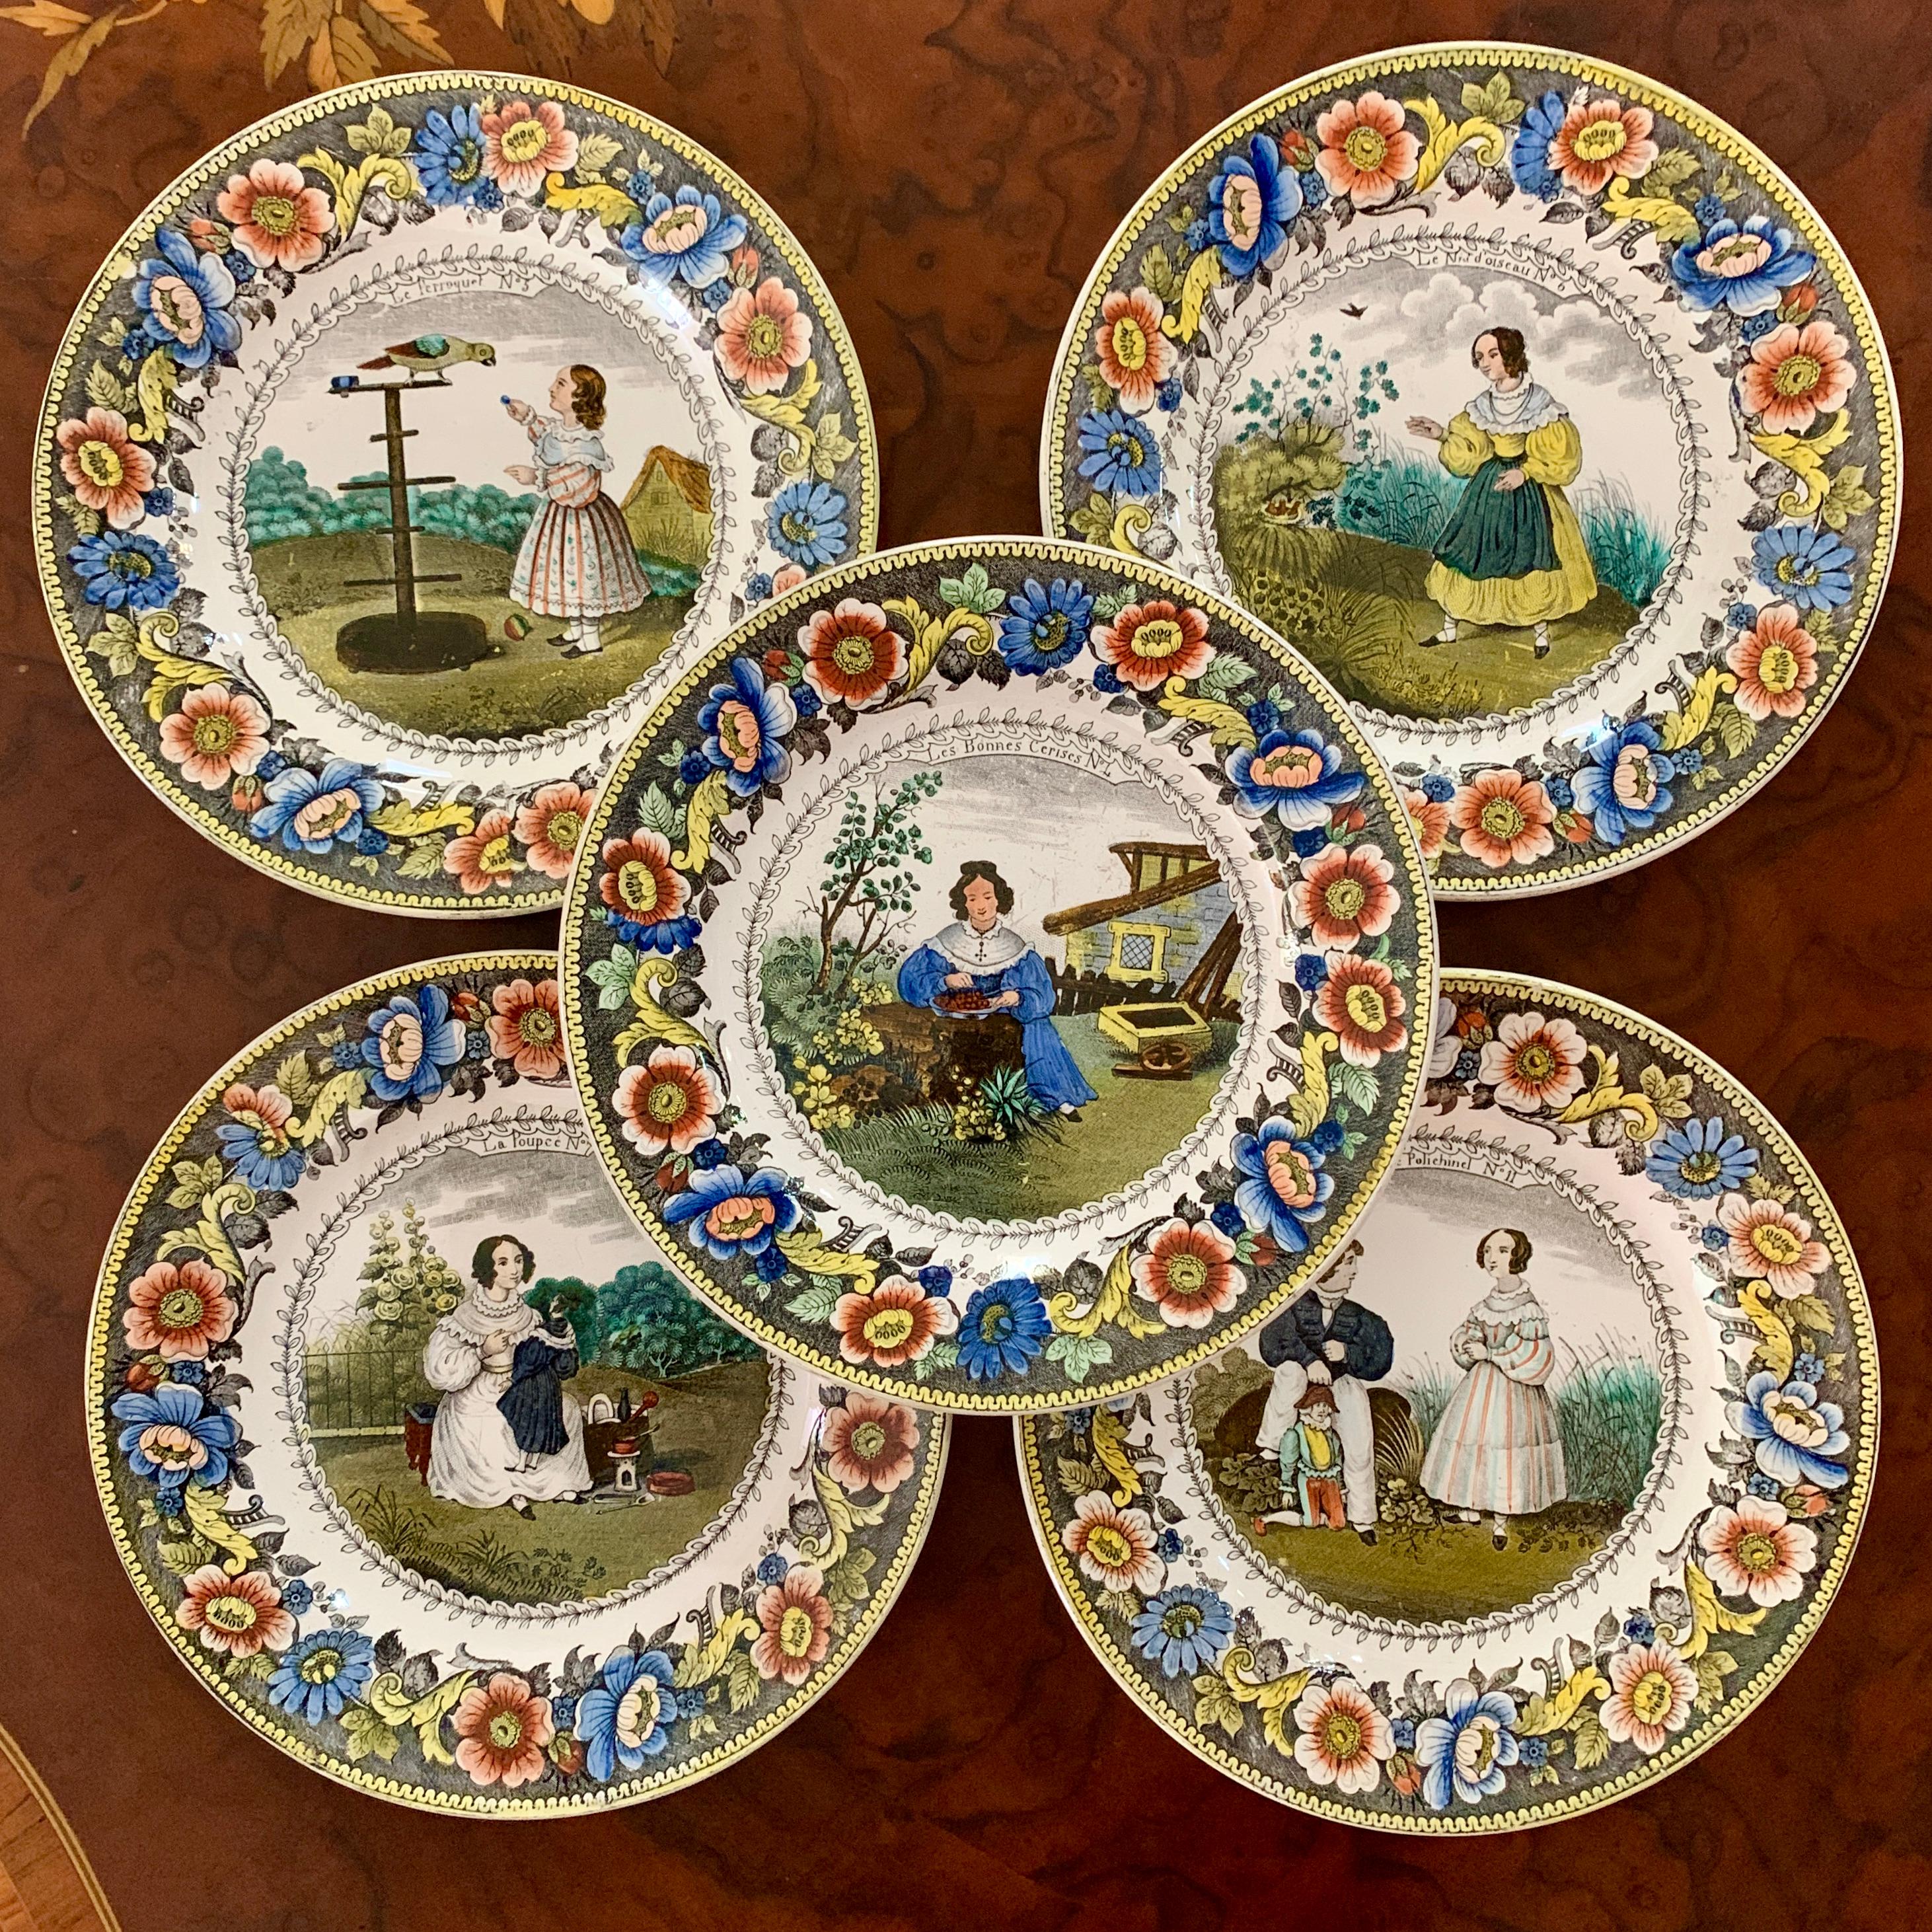 From the Creil region of Northern France, a transfer printed polychrome plate, titled – Le Polichinel. Circa 1830.
Pulcinella is a classical character that originated in the Commedia dell’Arte of the 17th century and became a popular character in